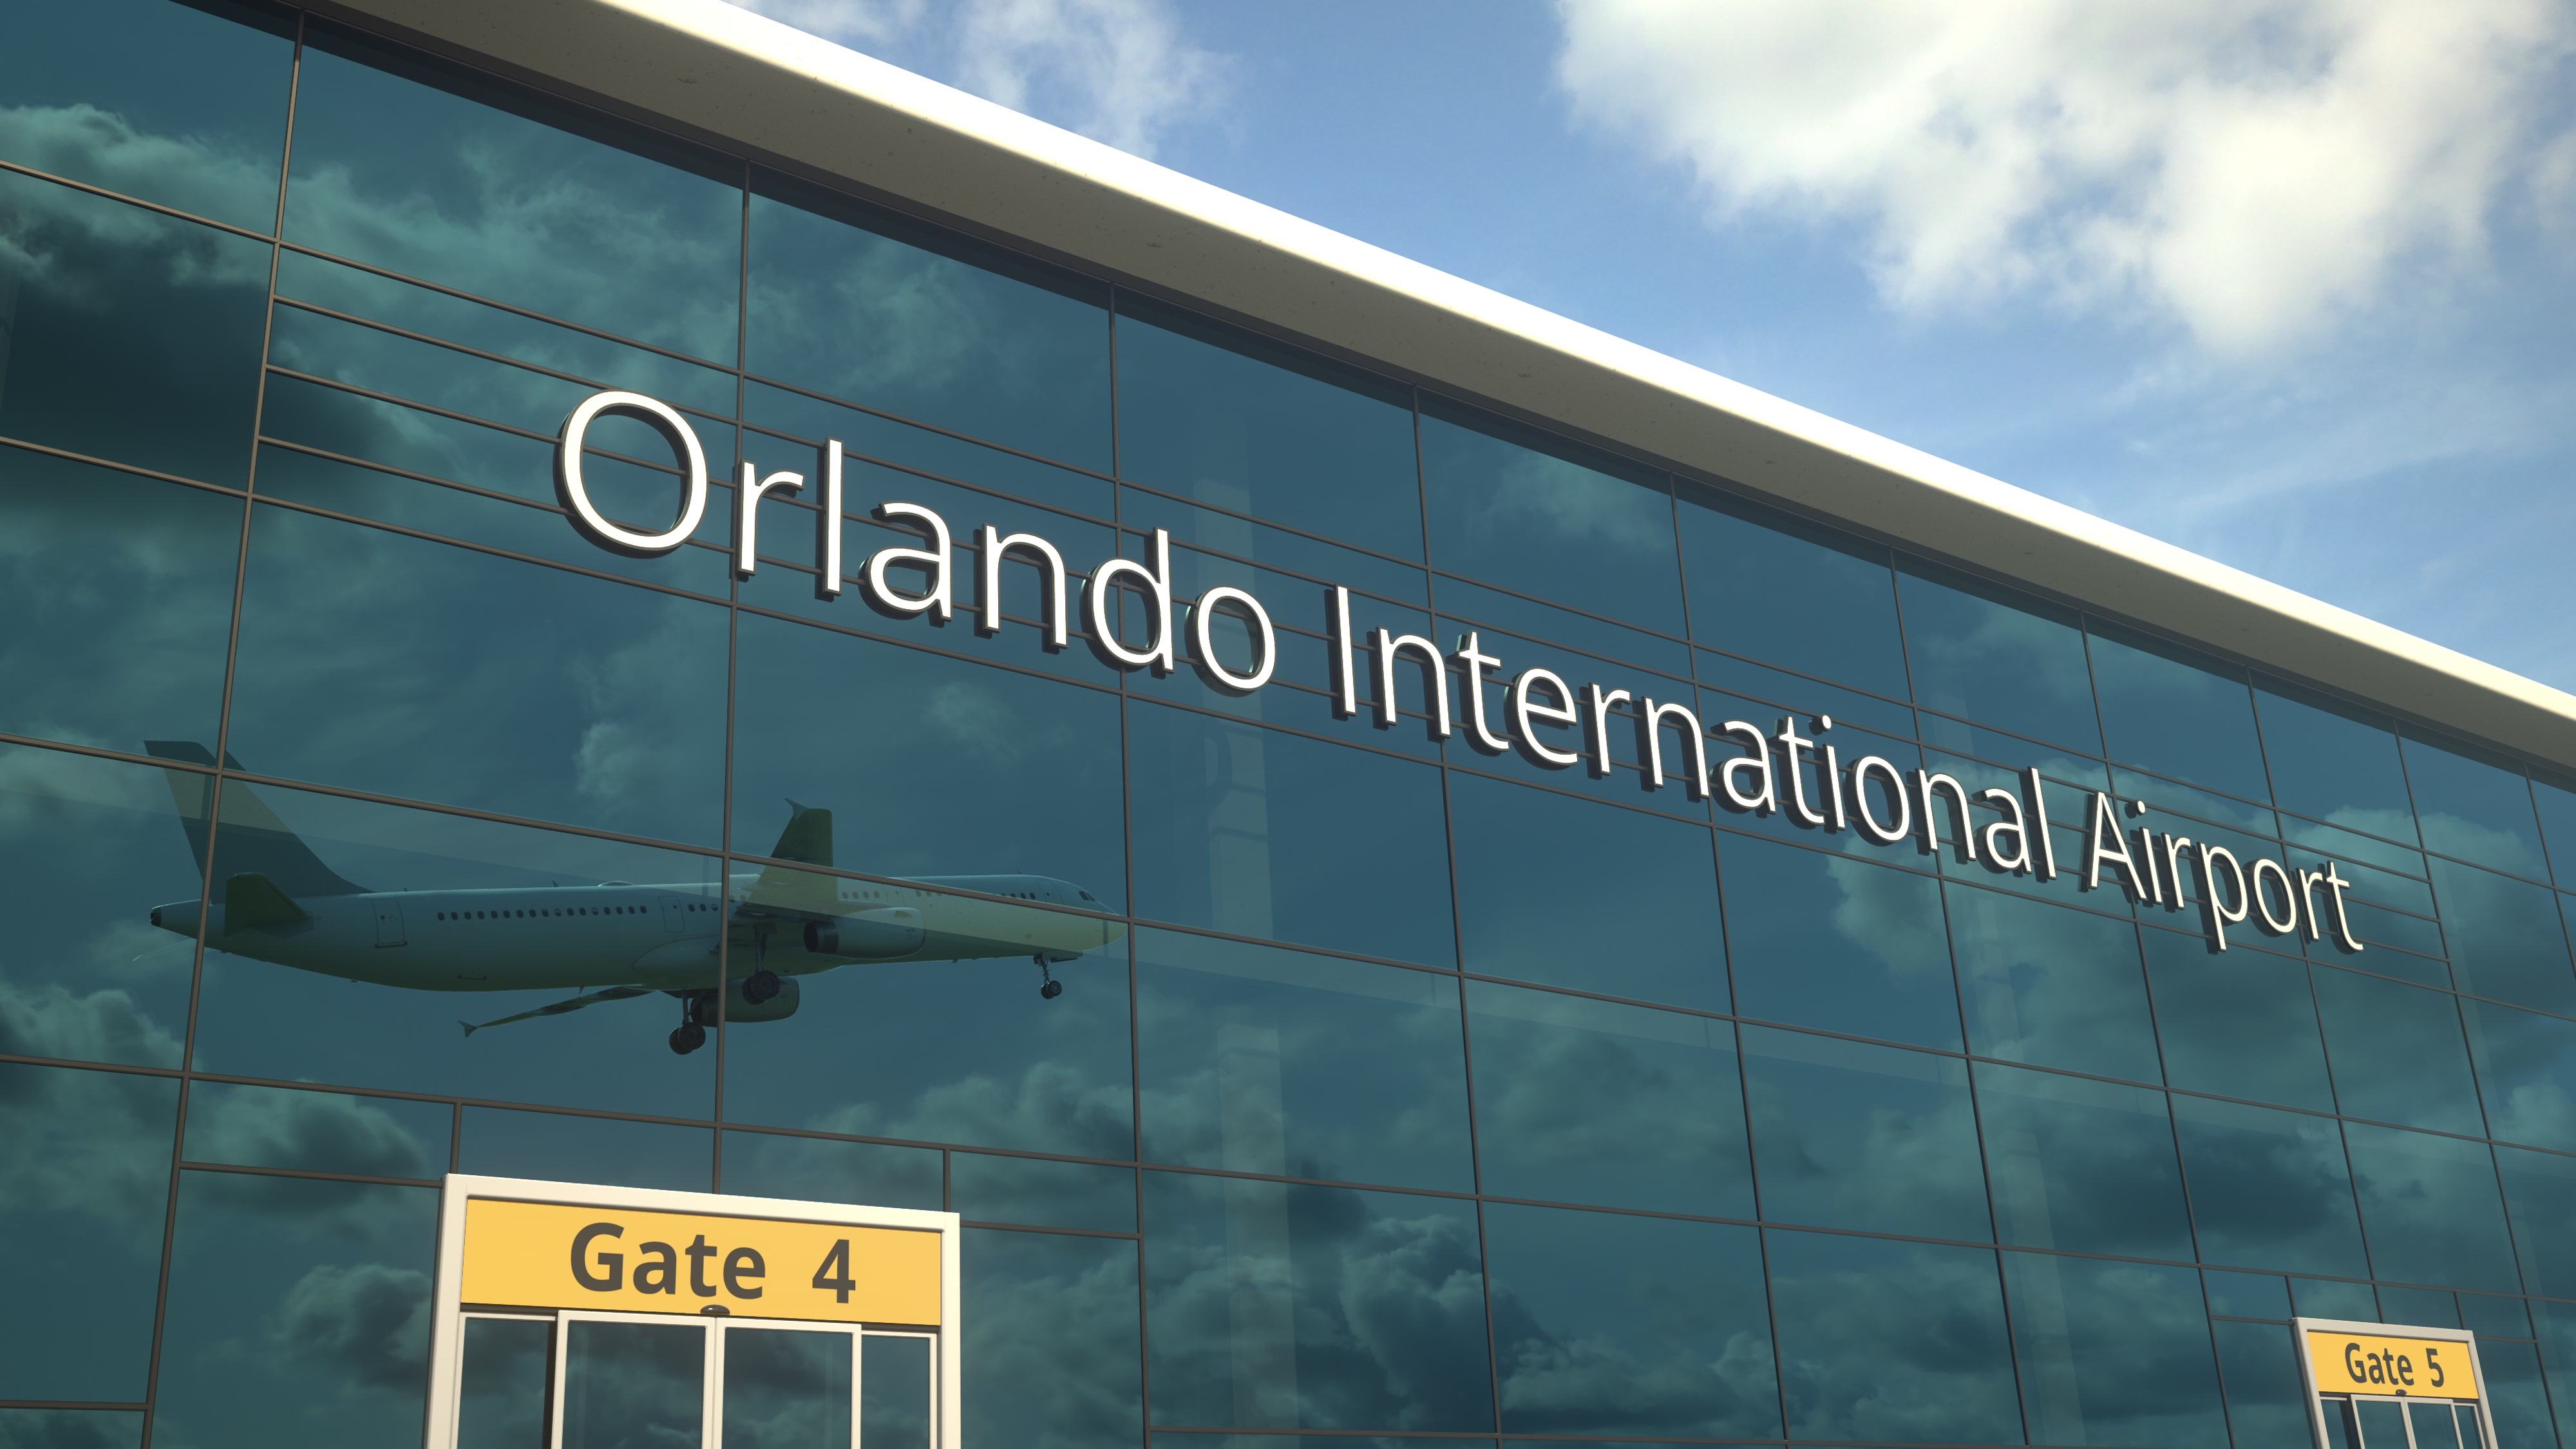 orlando international airport sign with image of plane